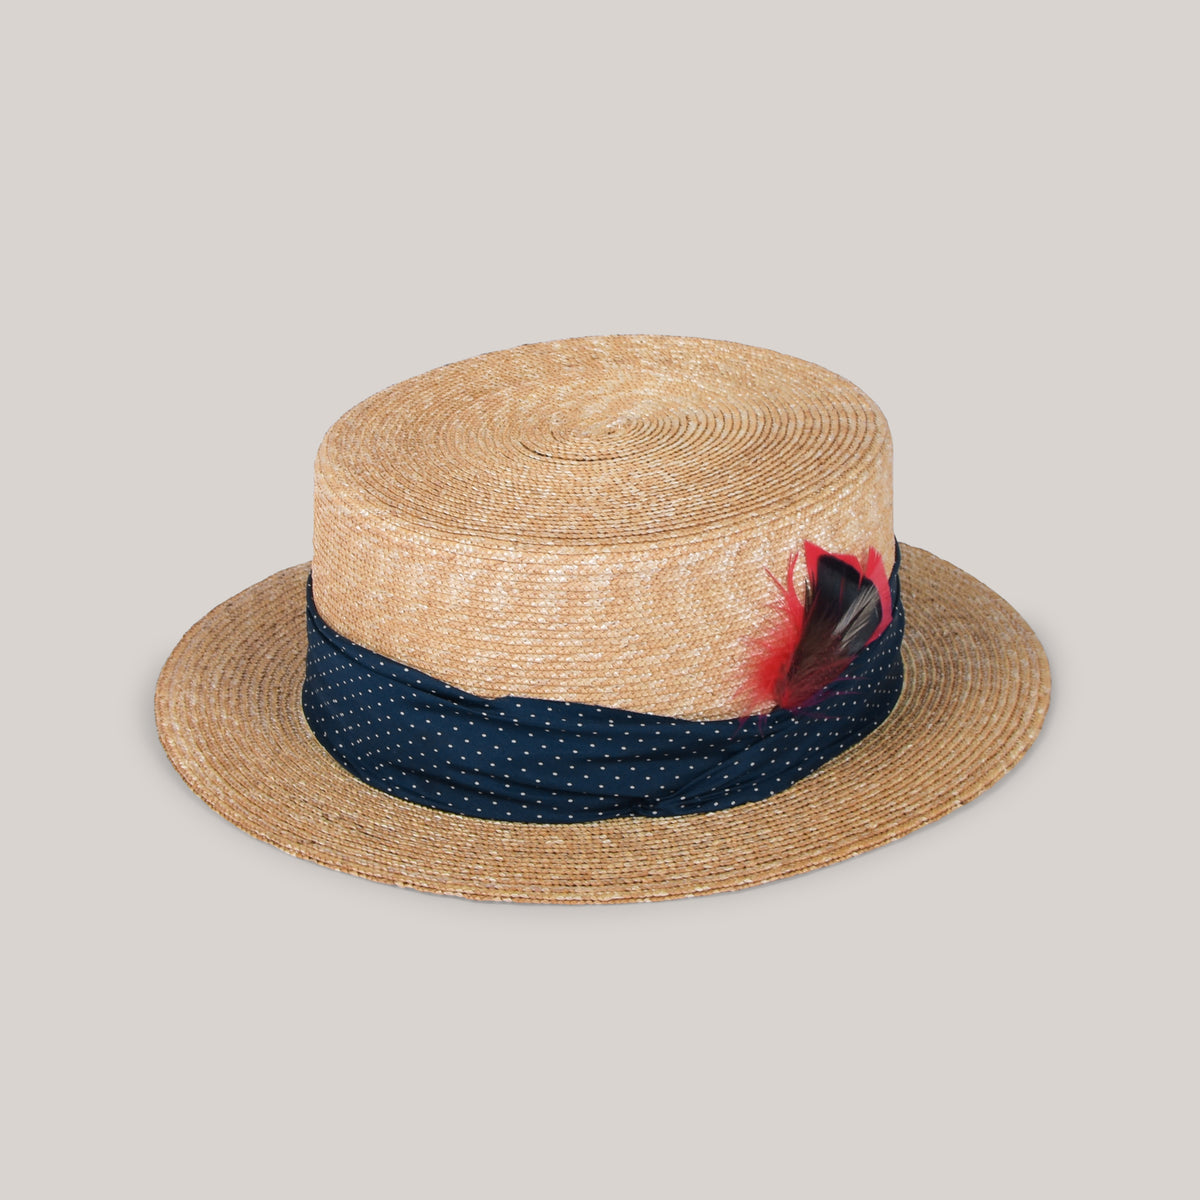 H.W. DOG & CO. BOATER - NAVY/WHITE SPOT – Pickings and Parry